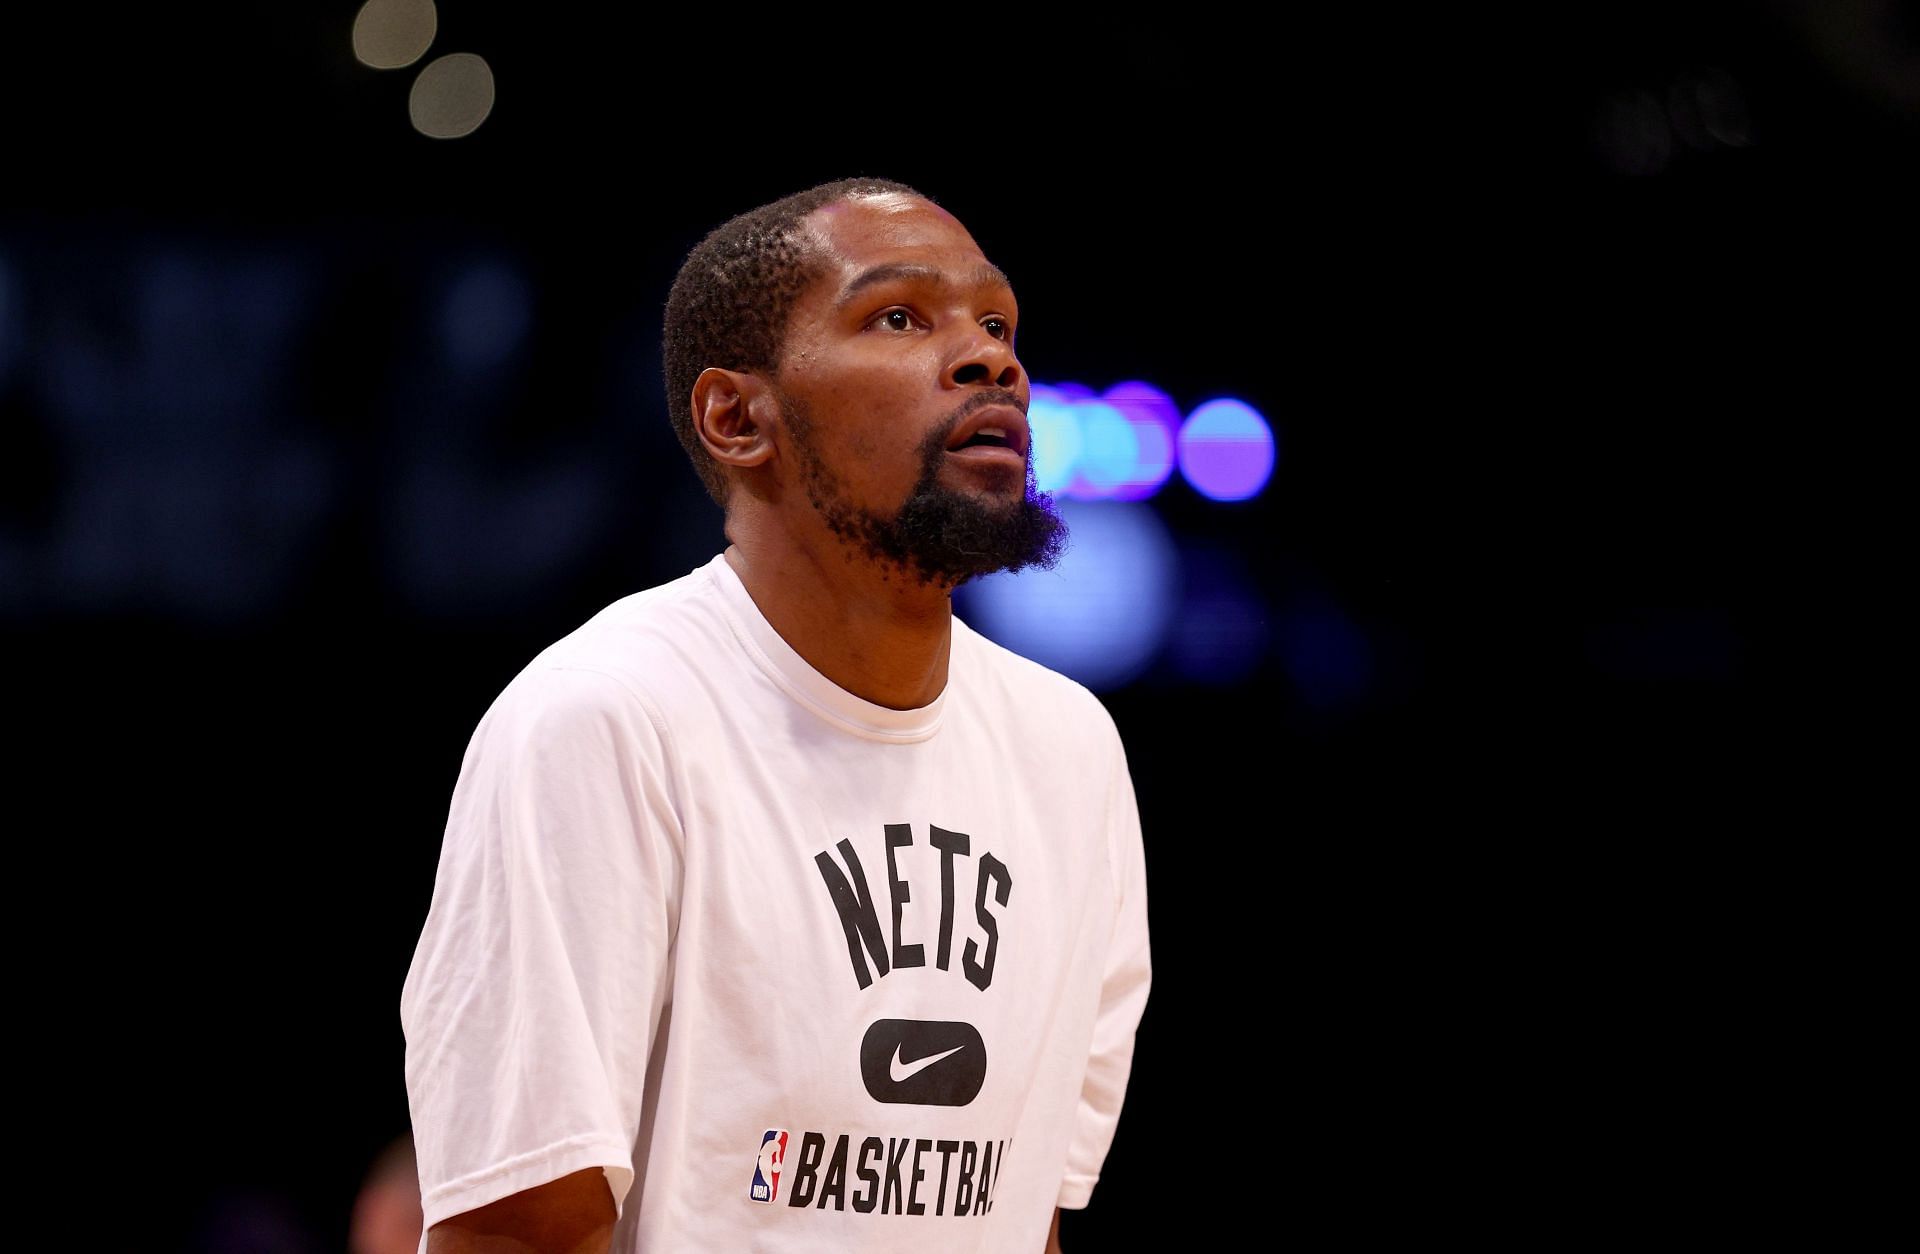 Kevin Durant is set to return to the Brooklyn Nets for the 2022-23 season